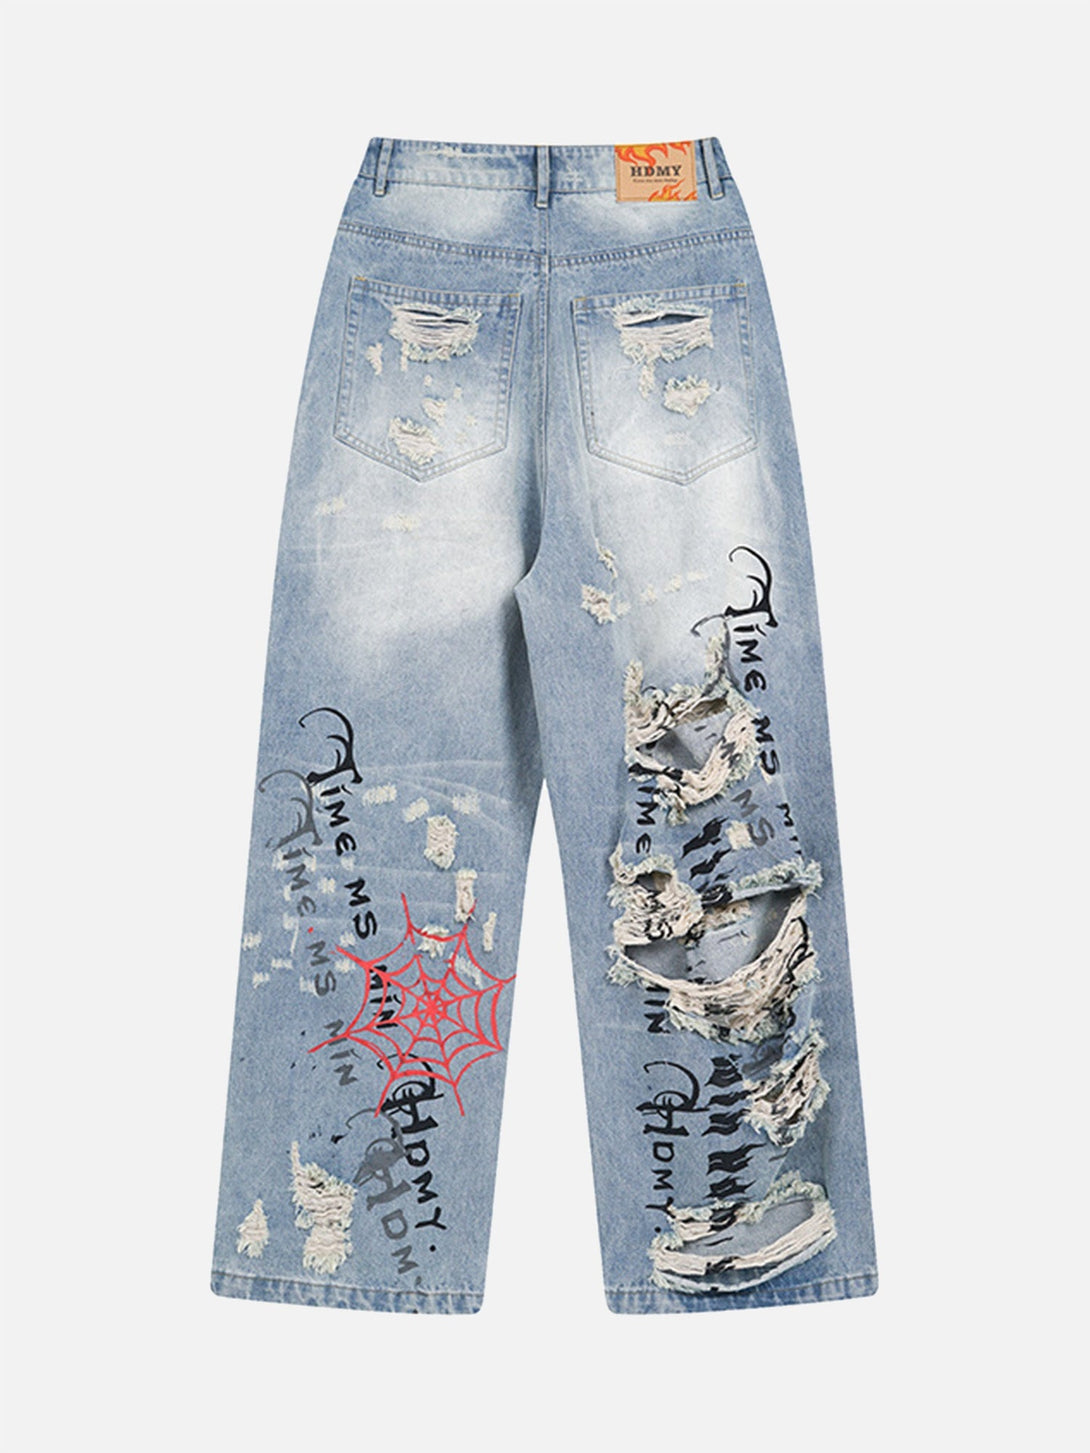 Majesda® - Beautiful And Trendy Personalized Cut Hand-printed Jeans- Outfit Ideas - Streetwear Fashion - majesda.com